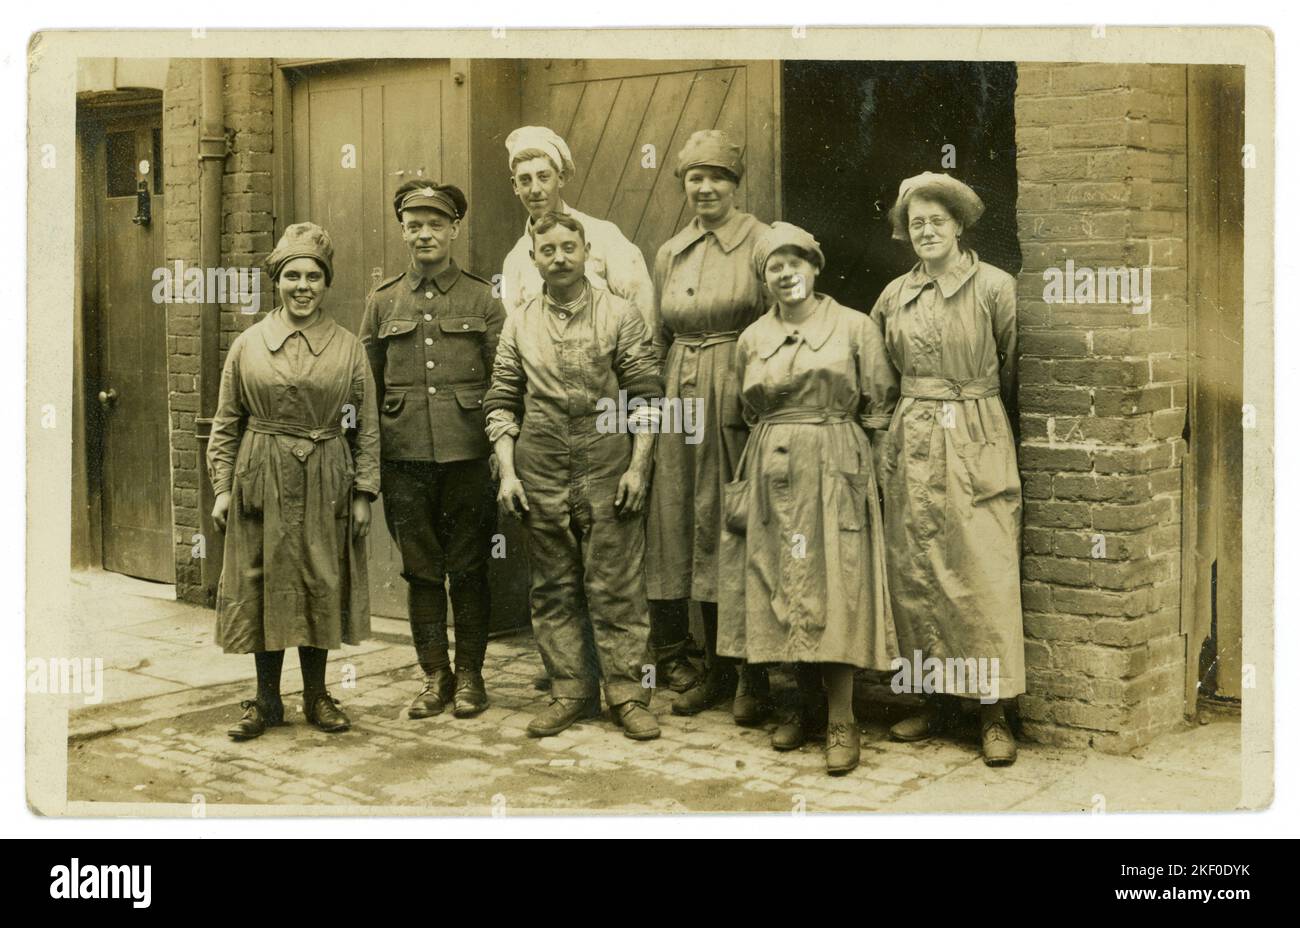 Original WW1 era postcard of group of army caterers both male and female from expeditionary force canteen or maybe the bakery all seem to be happy and enjoying themselves, one of he girls is cheeky and poking out her tongue. Lots of characters. The man in uniform is wearing an Army Service Corps (A.S.C.) badge on his postcard back design indicates the U.K., maybe at a training camp. Stock Photo